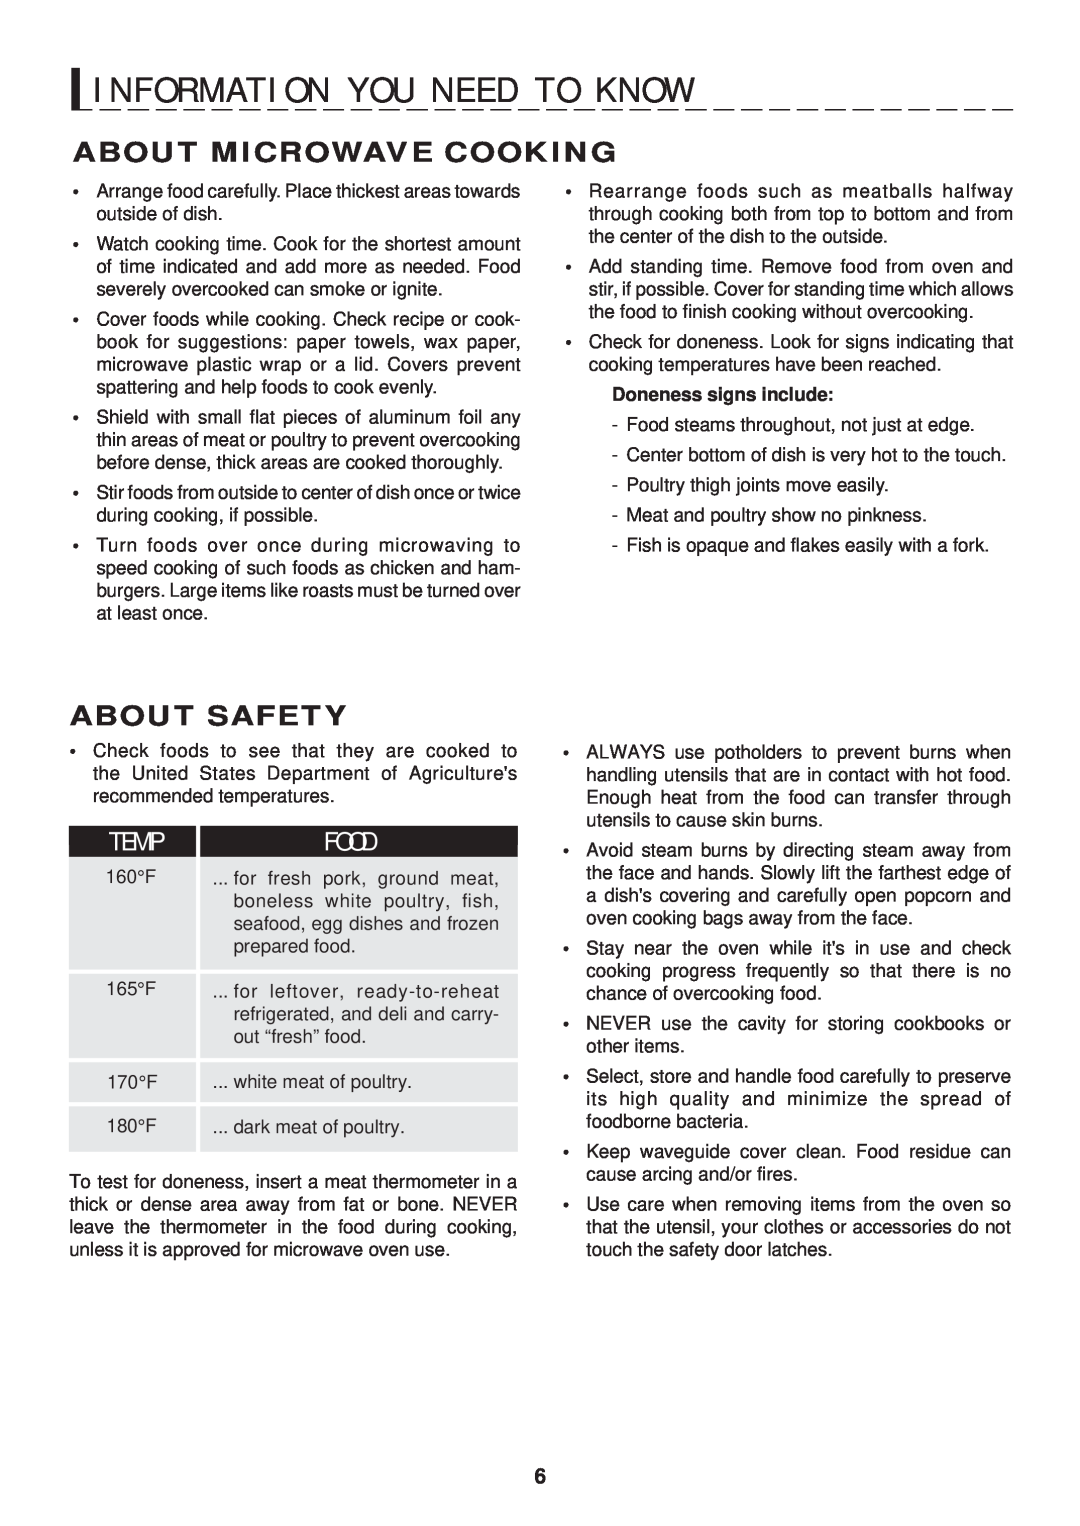 Sharp R-401F About Microwave Cooking, About Safety, T E M P, F O O D, I N F O R M A T I O N Y O U N E E D T O K N O W 